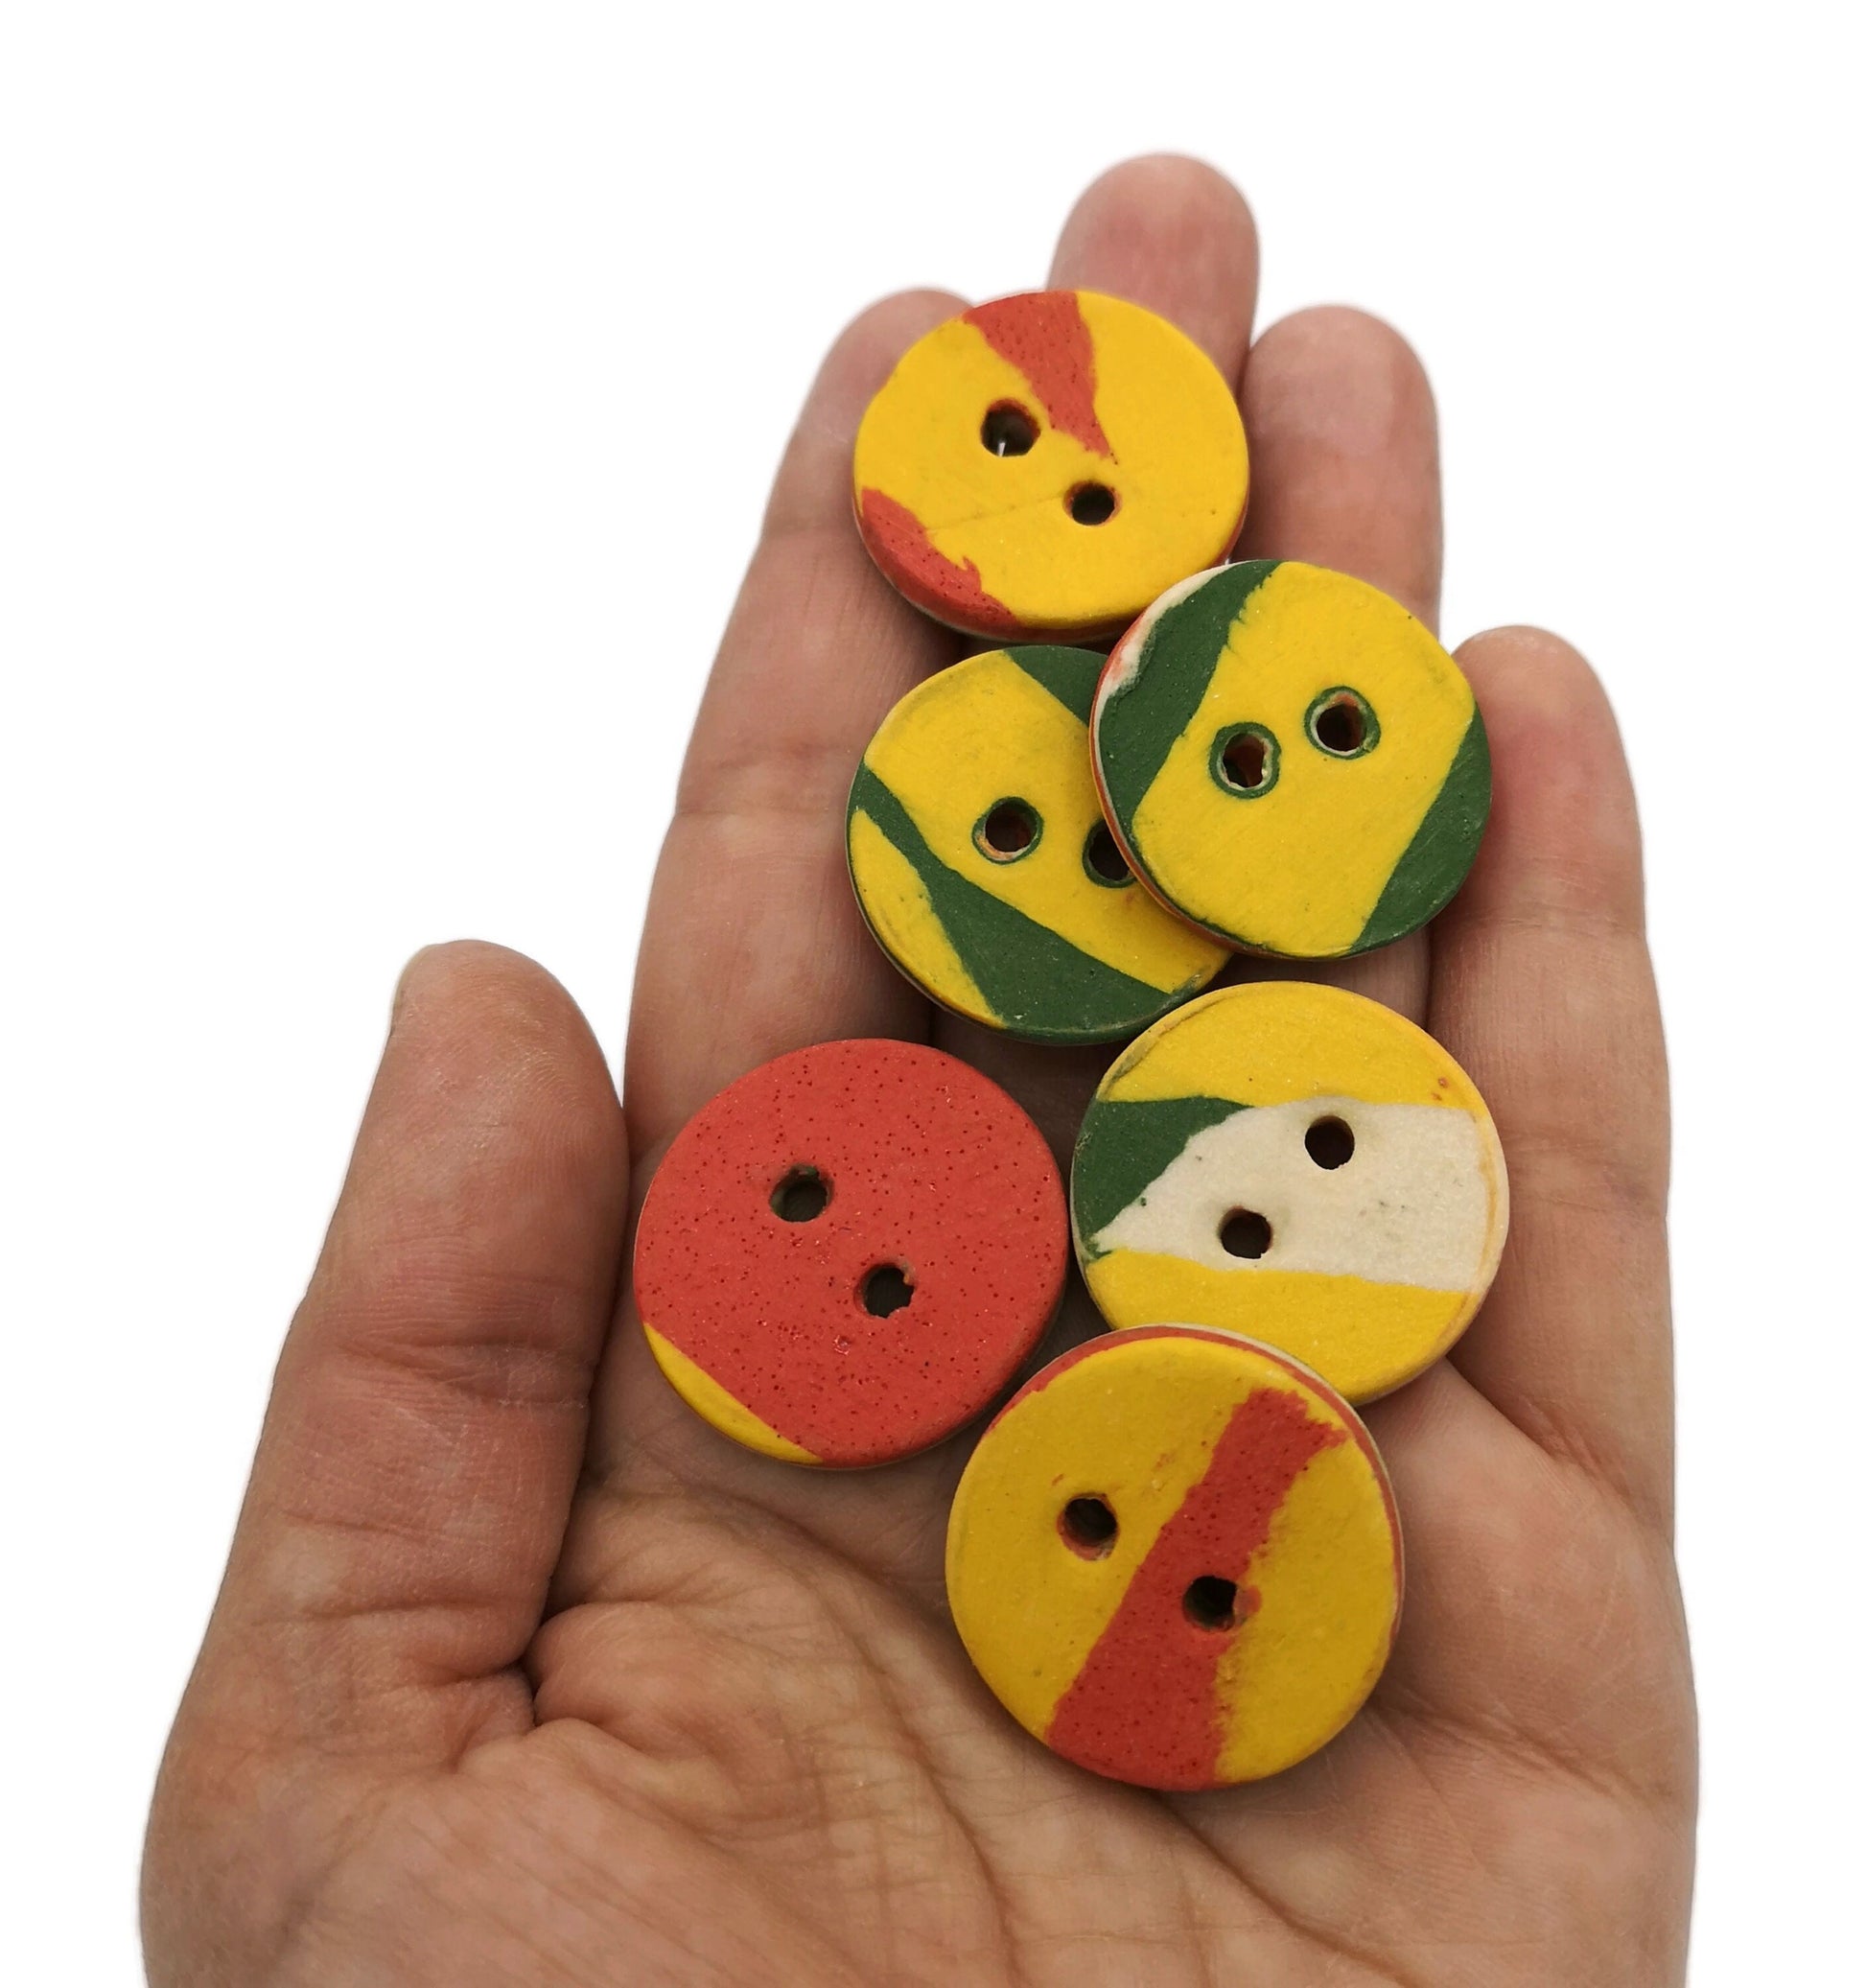 6 Pcs Handmade Ceramic Sewing Buttons, Coat Buttons Strange And Unusual, Jewelry Making Buttons Cute Best Sellers Sewing Supplies And Notion - Ceramica Ana Rafael